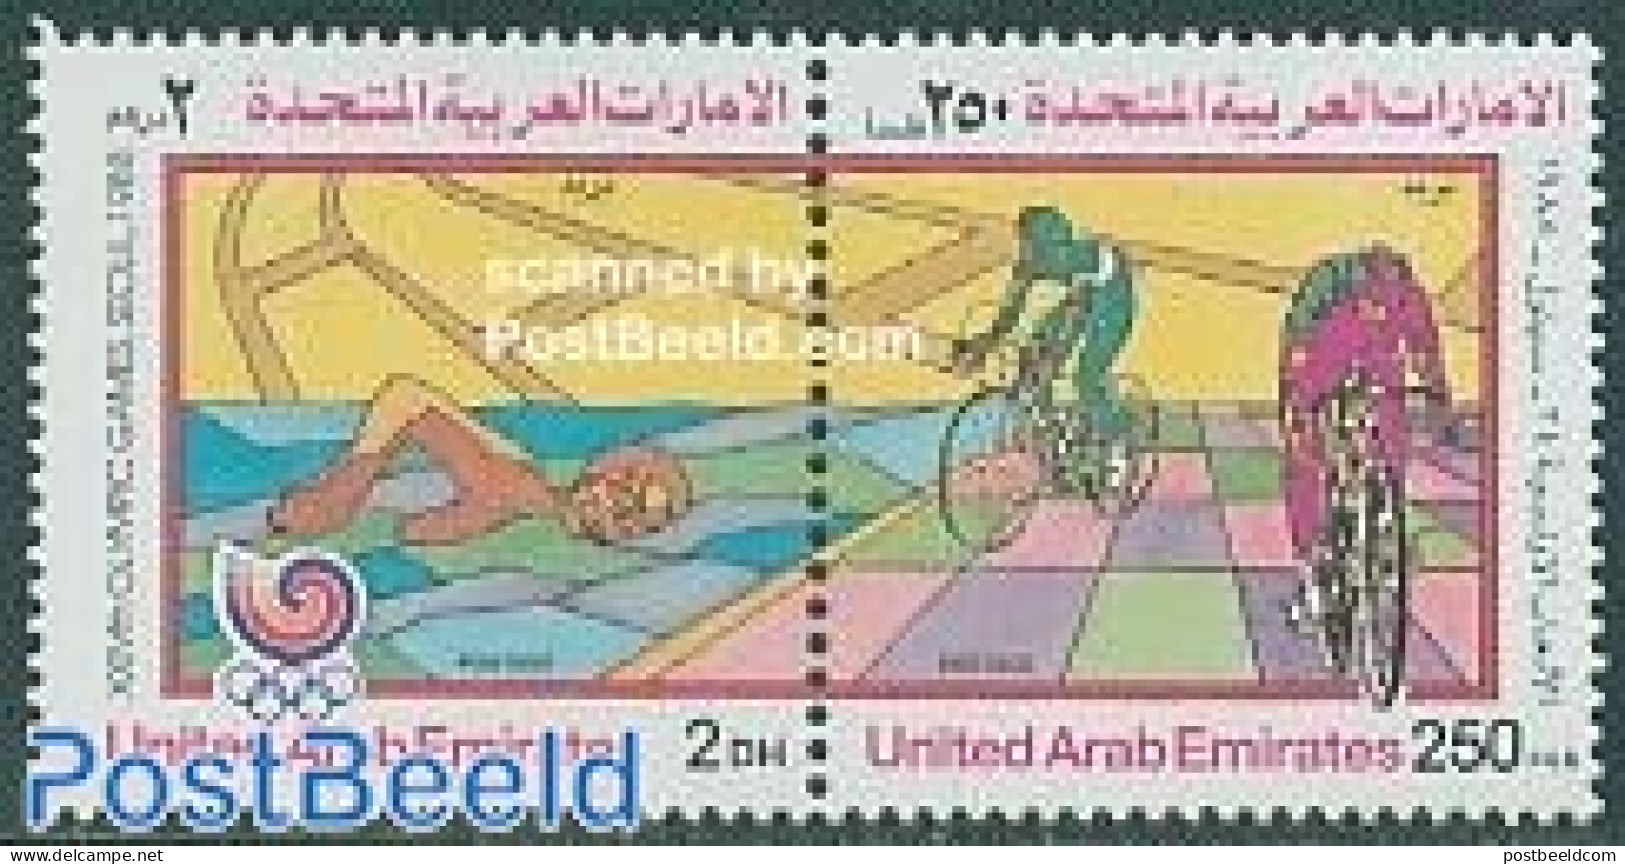 United Arab Emirates 1988 Olympic Games 2v [:], Mint NH, Sport - Cycling - Olympic Games - Swimming - Cyclisme